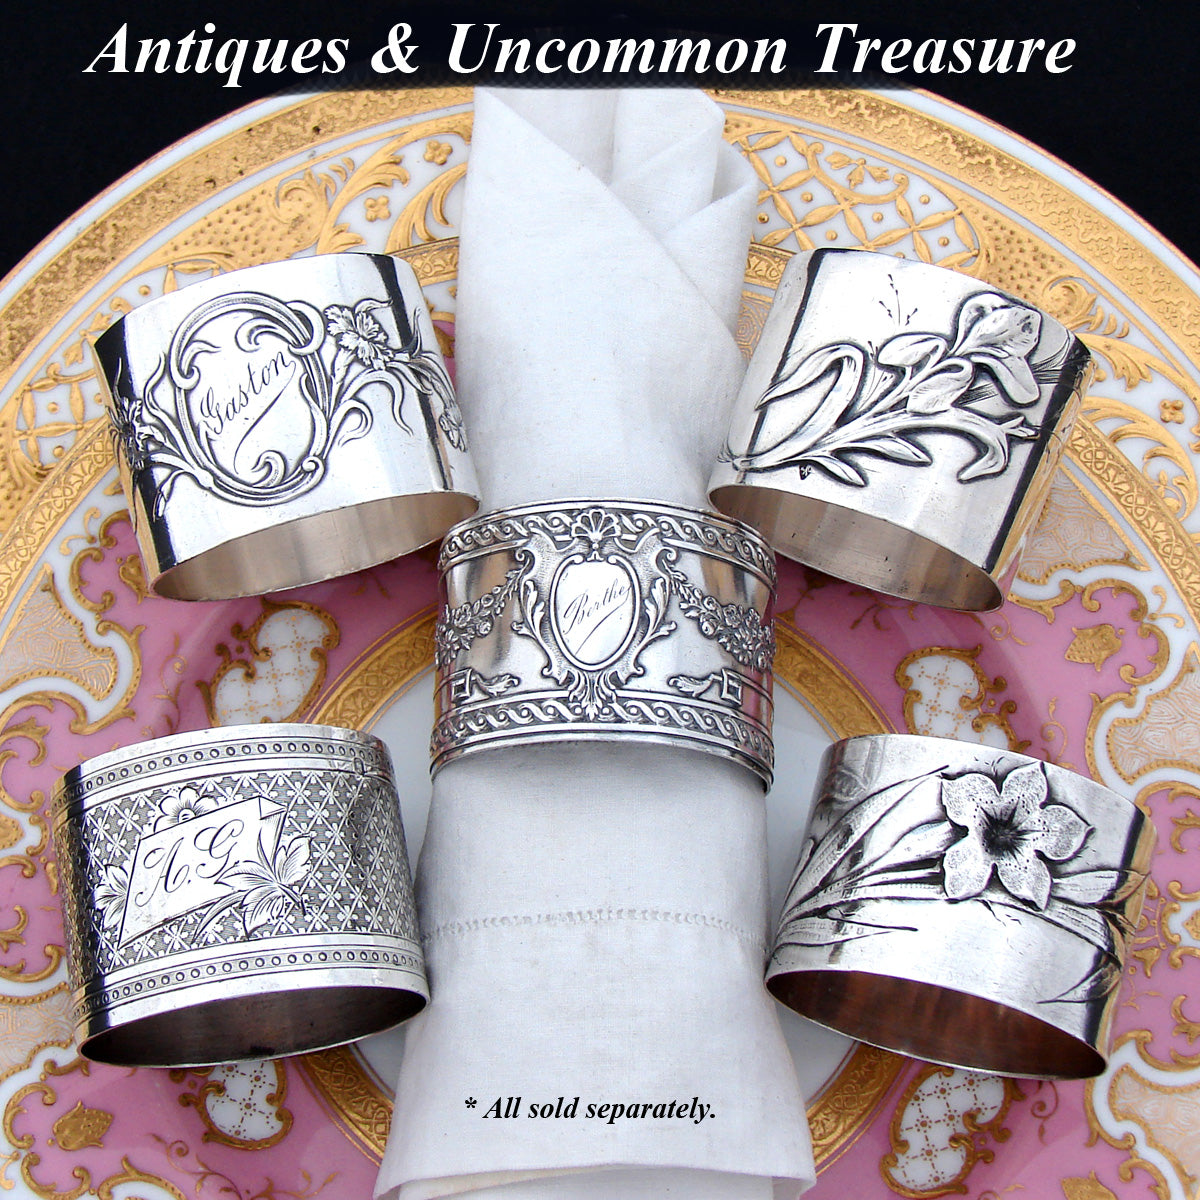 Ornate Antique French Sterling Silver Napkin Ring, Guilloche Style Decoration, "A.G." Monogram